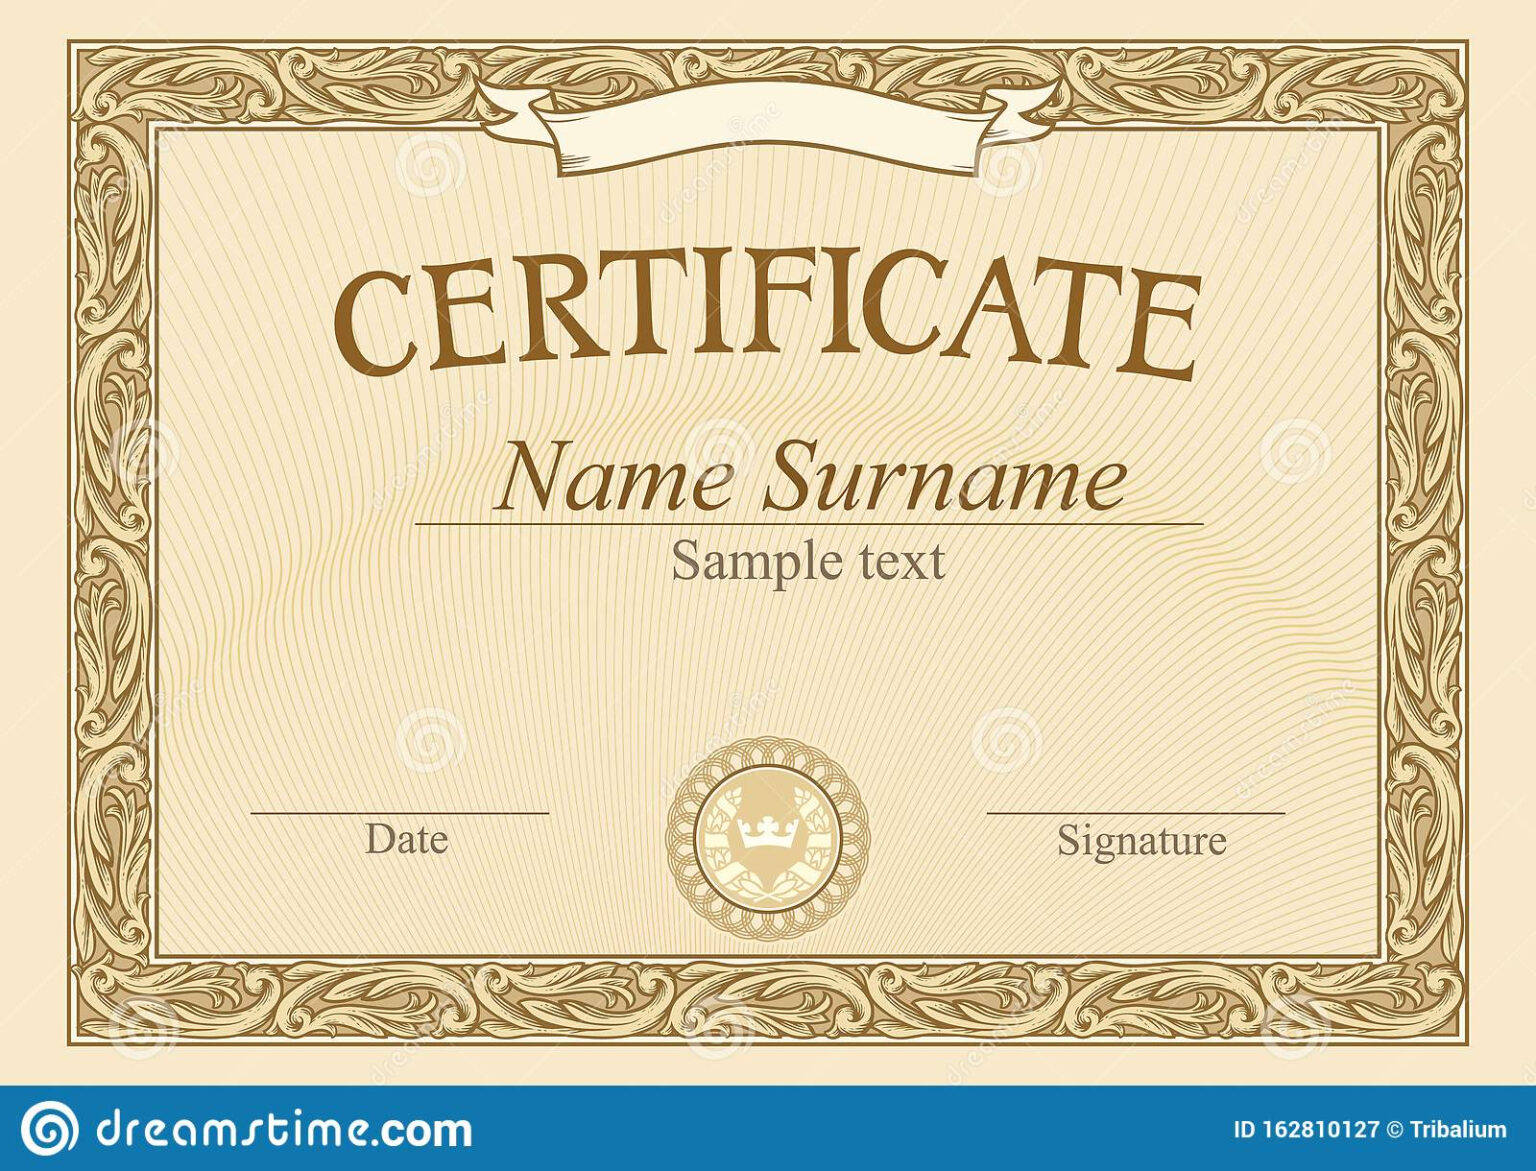 10-1018-certificate-template-stock-photos-free-royalty-free-within